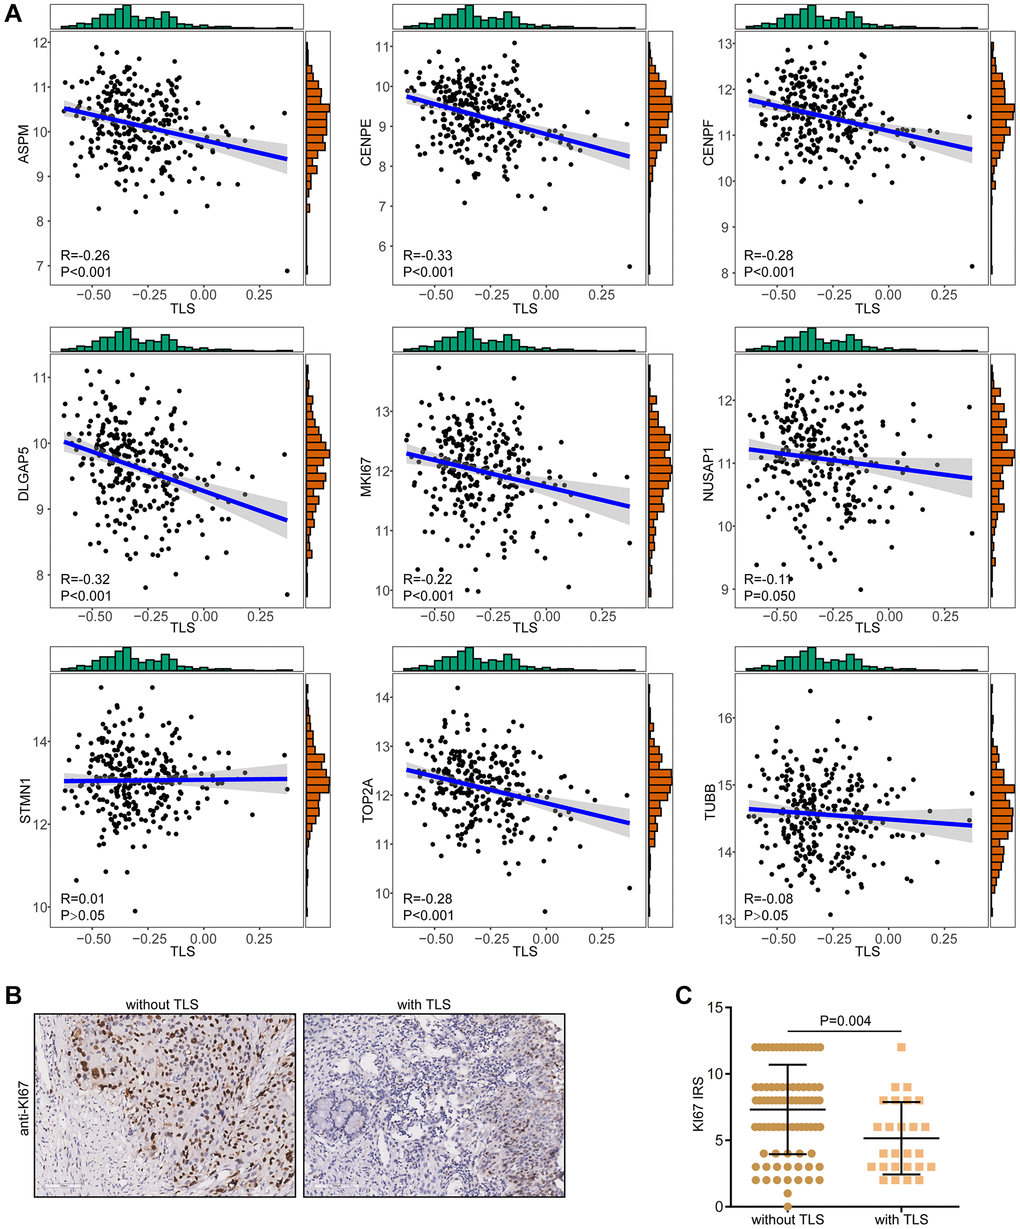 Correlations between TLS and proliferation biomarkers. (A) Correlations between TLS score and a total of nine proliferation biomarkers in the TCGA-CESC cohort. (B, C) Representative images revealing KI67 expression in CESC samples with or without TLS and semi-quantitative analysis.